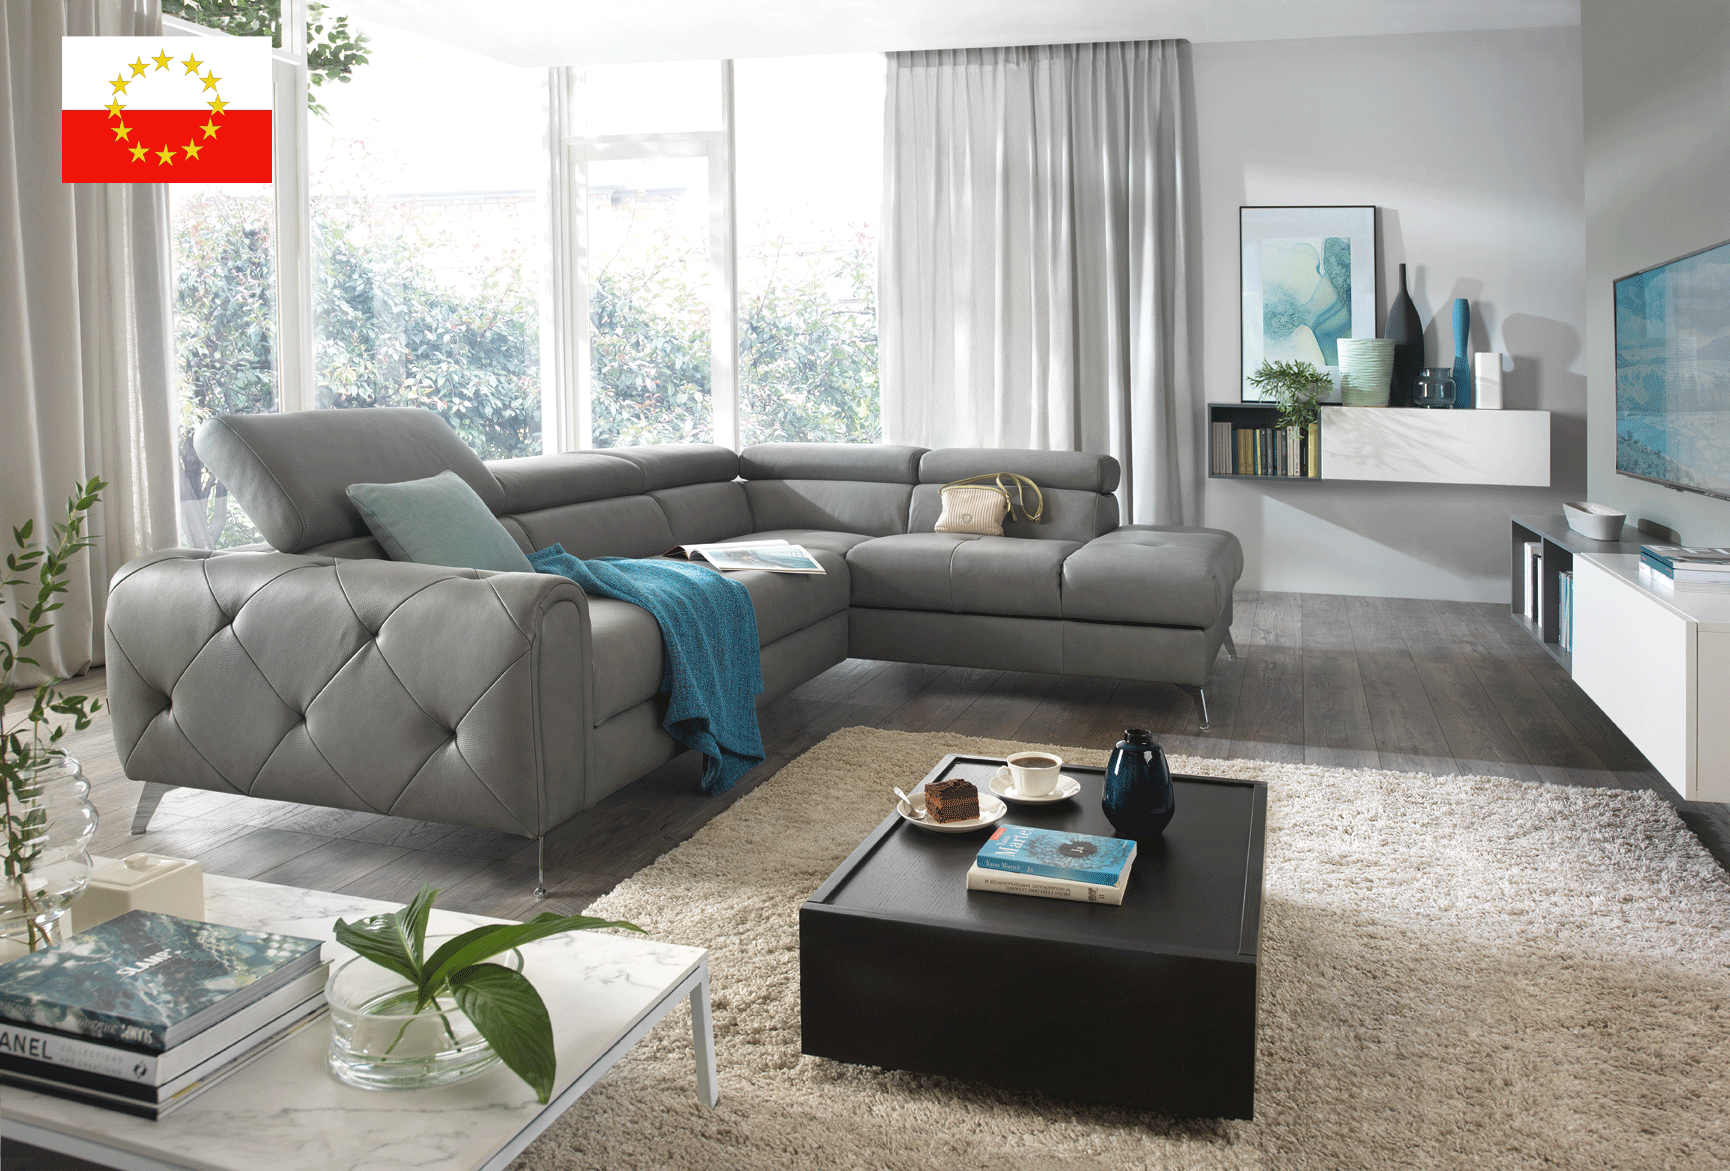 Brands Kuka Home Camelia Sectional w/Bed and Storage